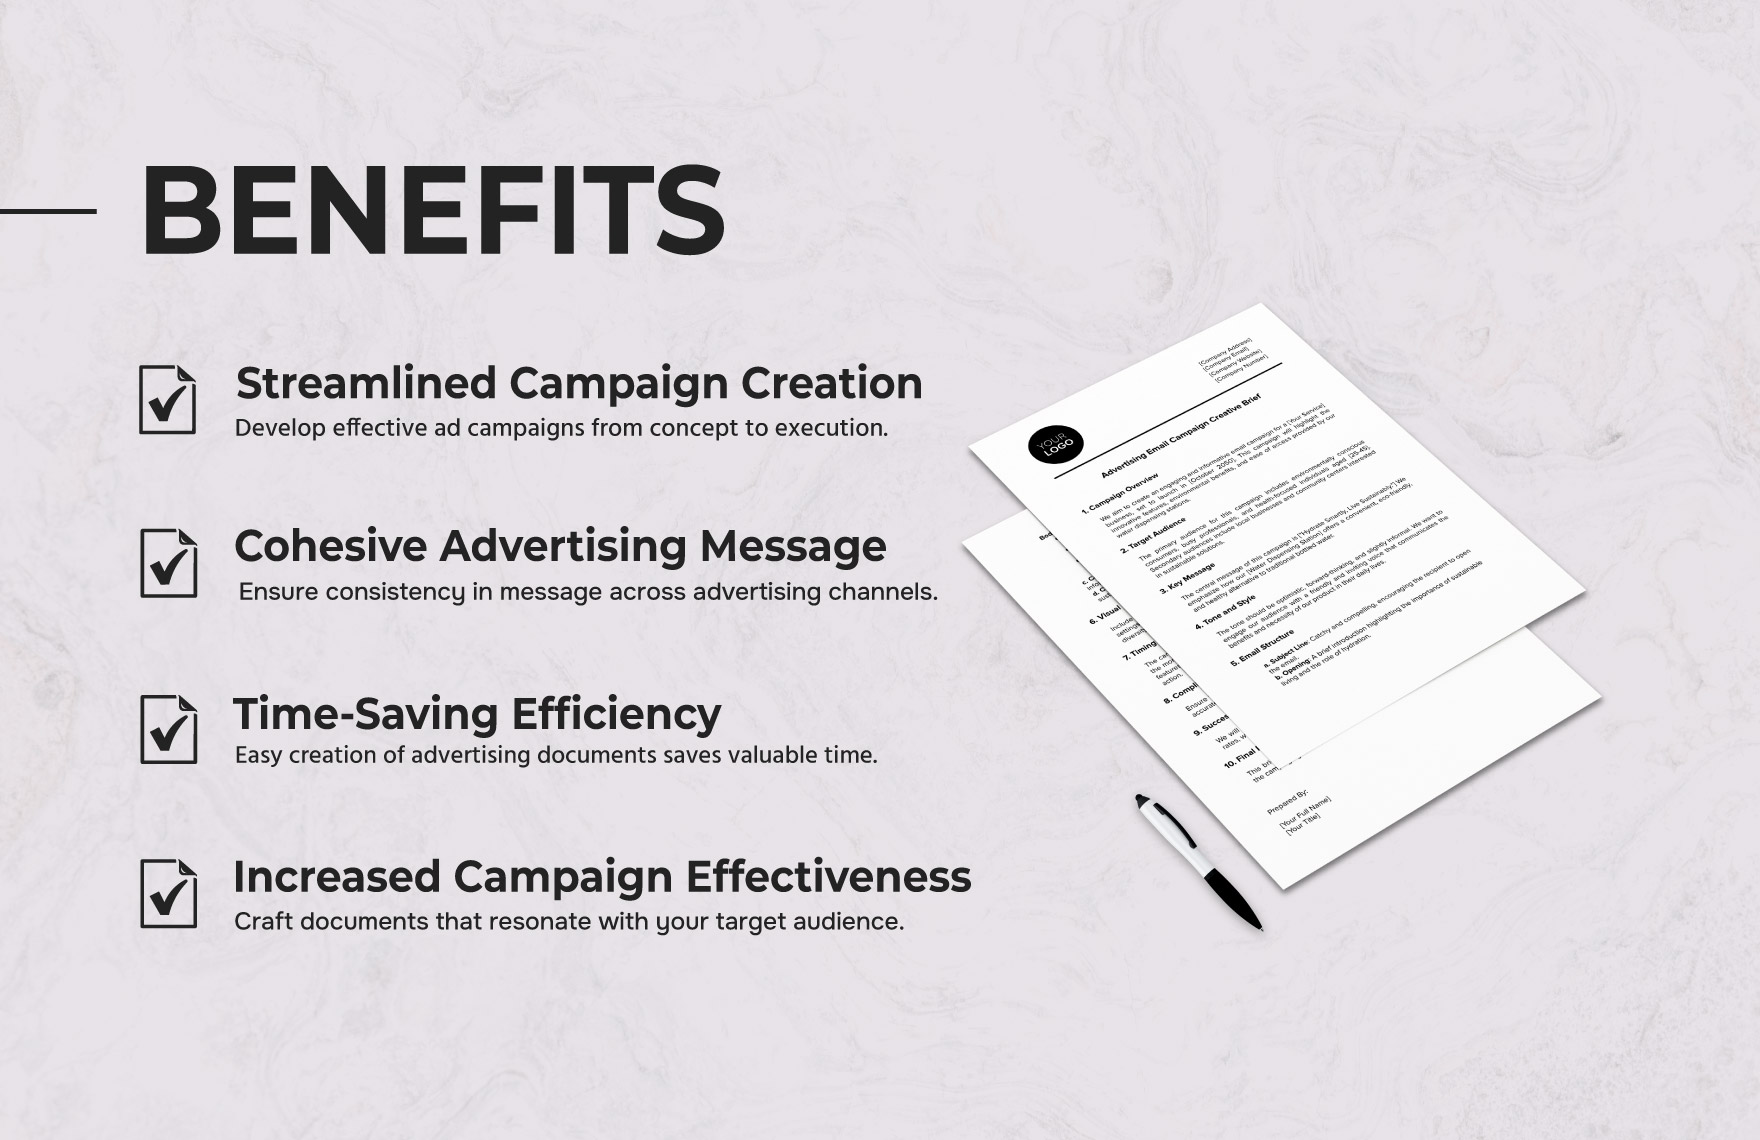 Advertising Email Campaign Creative Brief Template